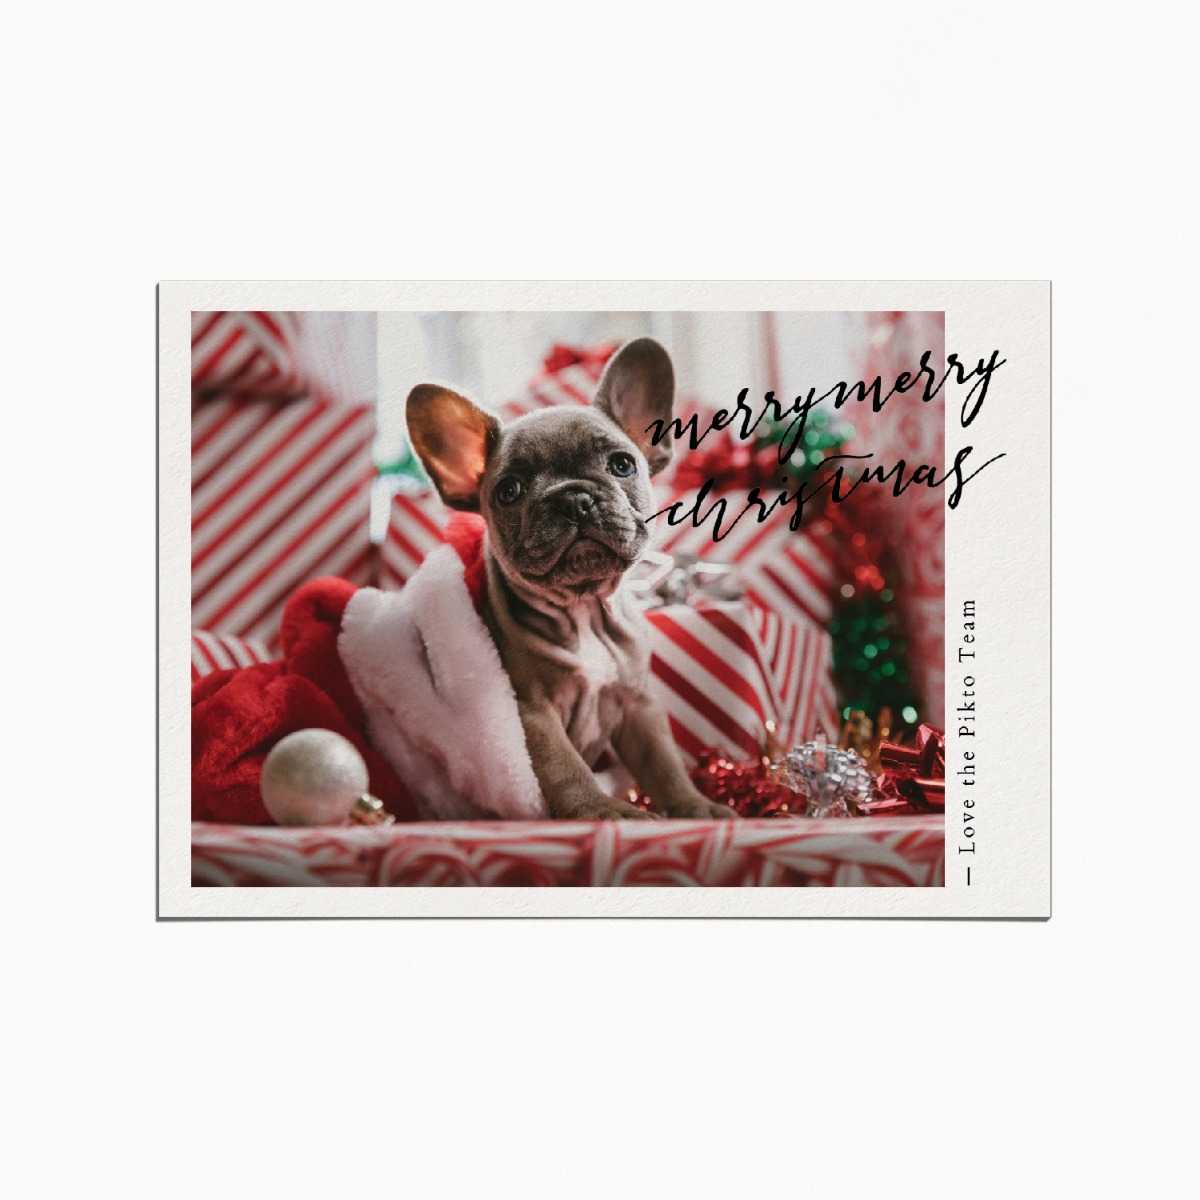 Holiday card with an image of a puppy standing amongst a pile of gifts wrapped in candy cane wrapping paper